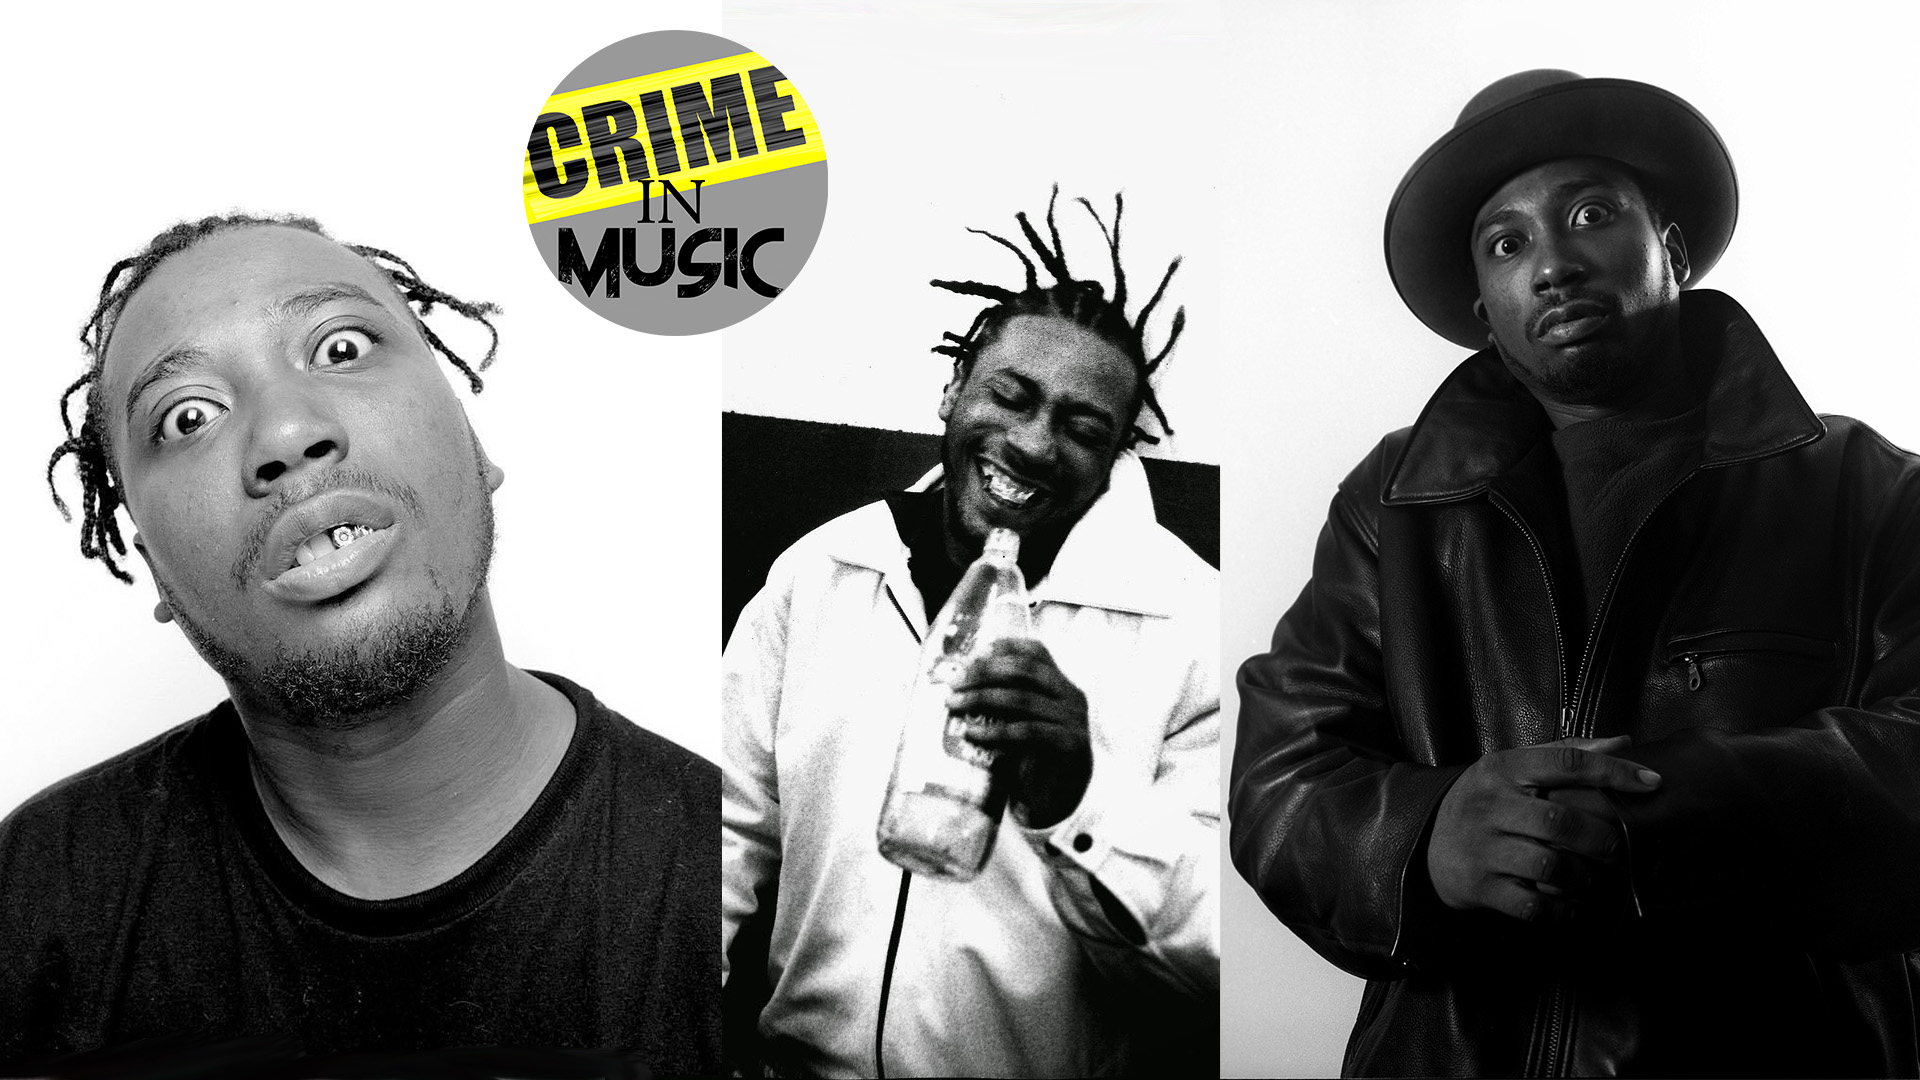 photo collage of Ol' Dirty Bastard, Musician, rapper